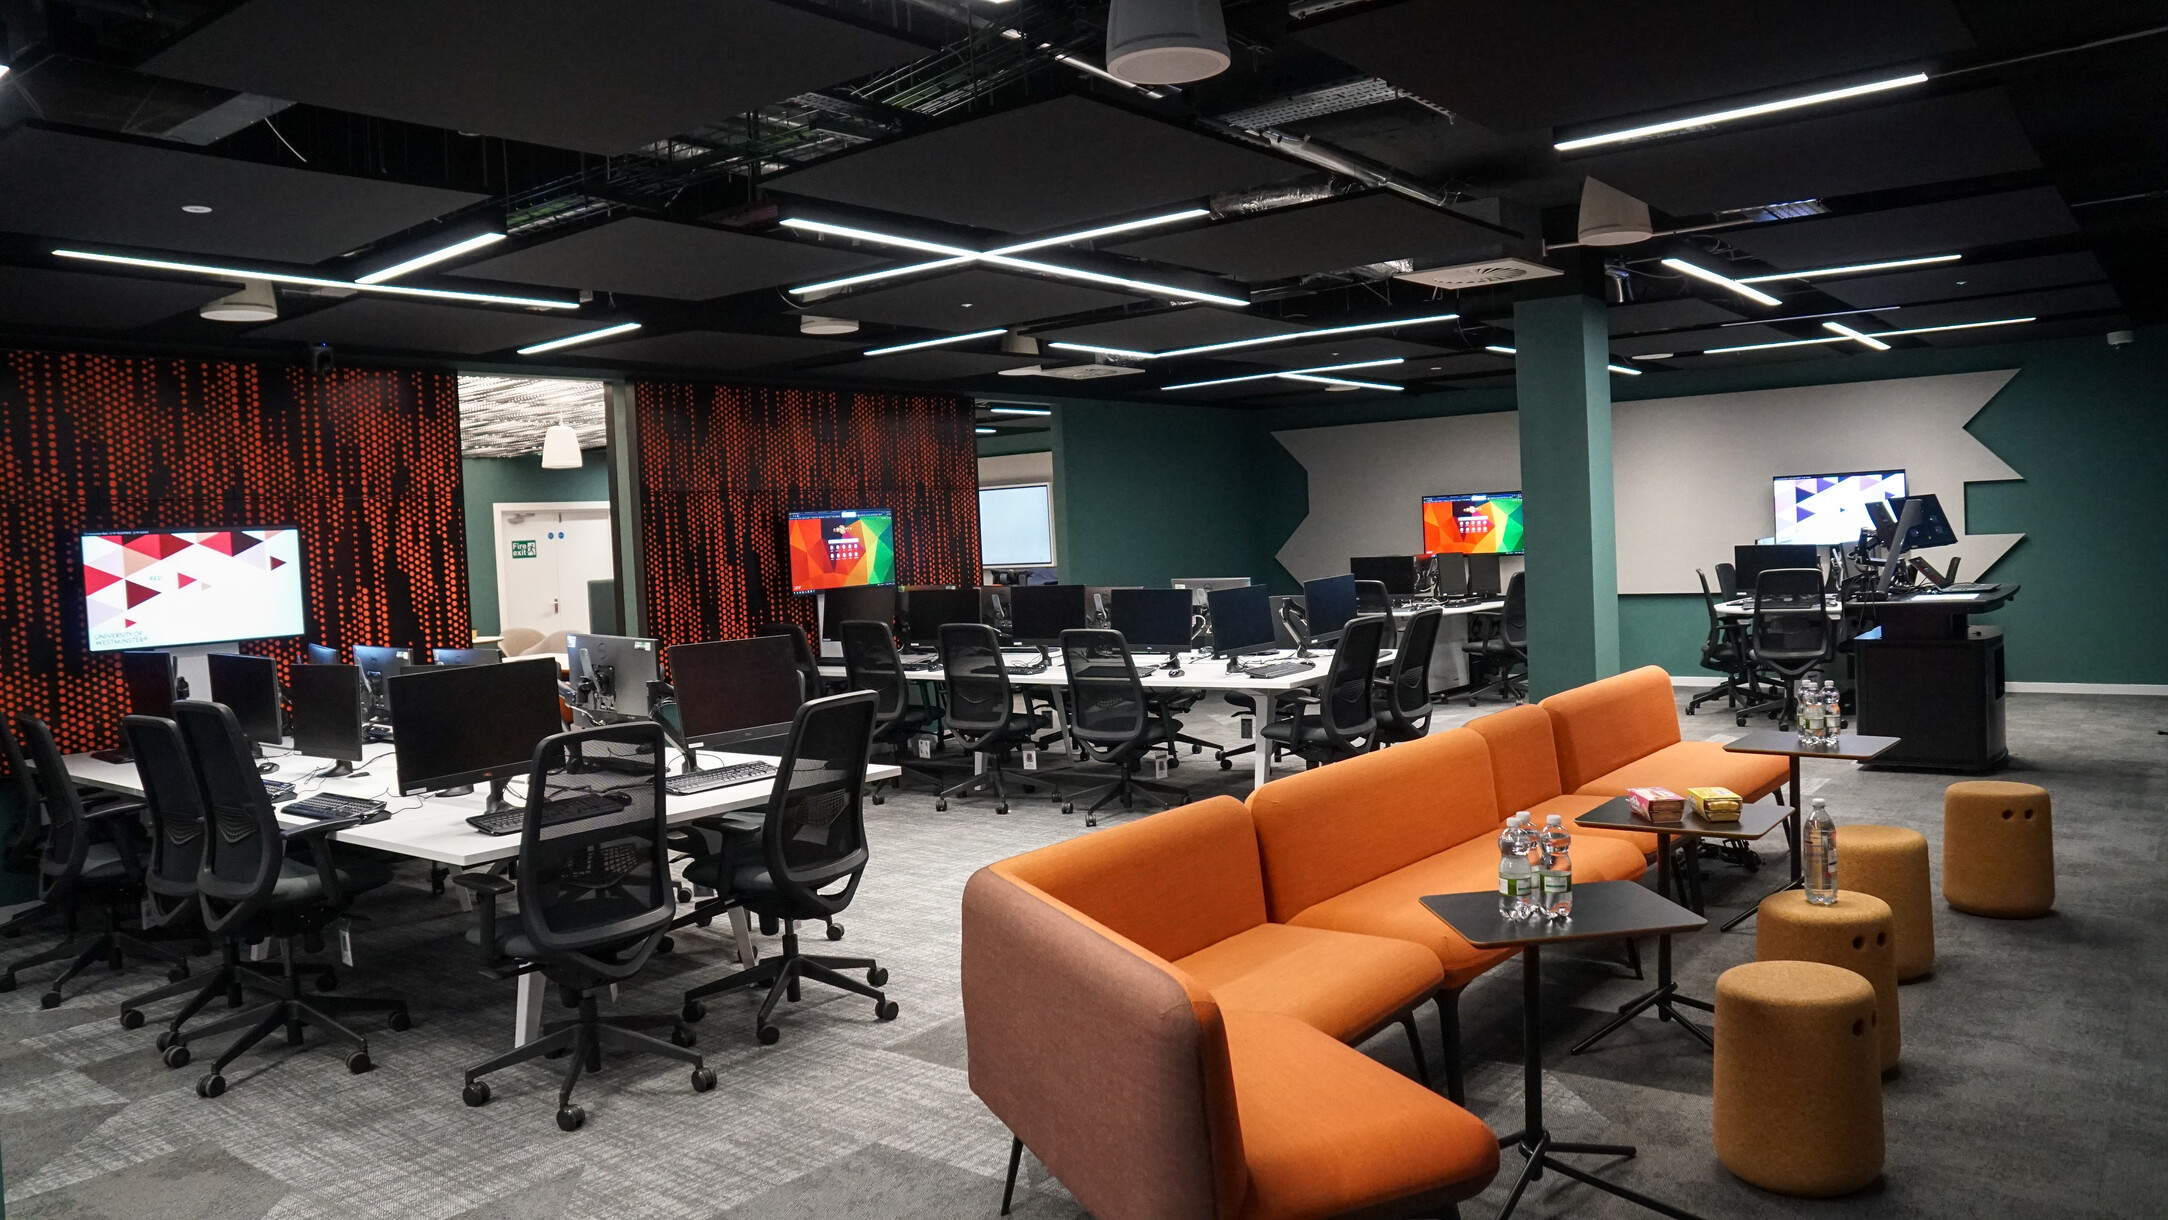 Collaborative learning space in the Department of Computer Science at The University of Westminster, London, UK